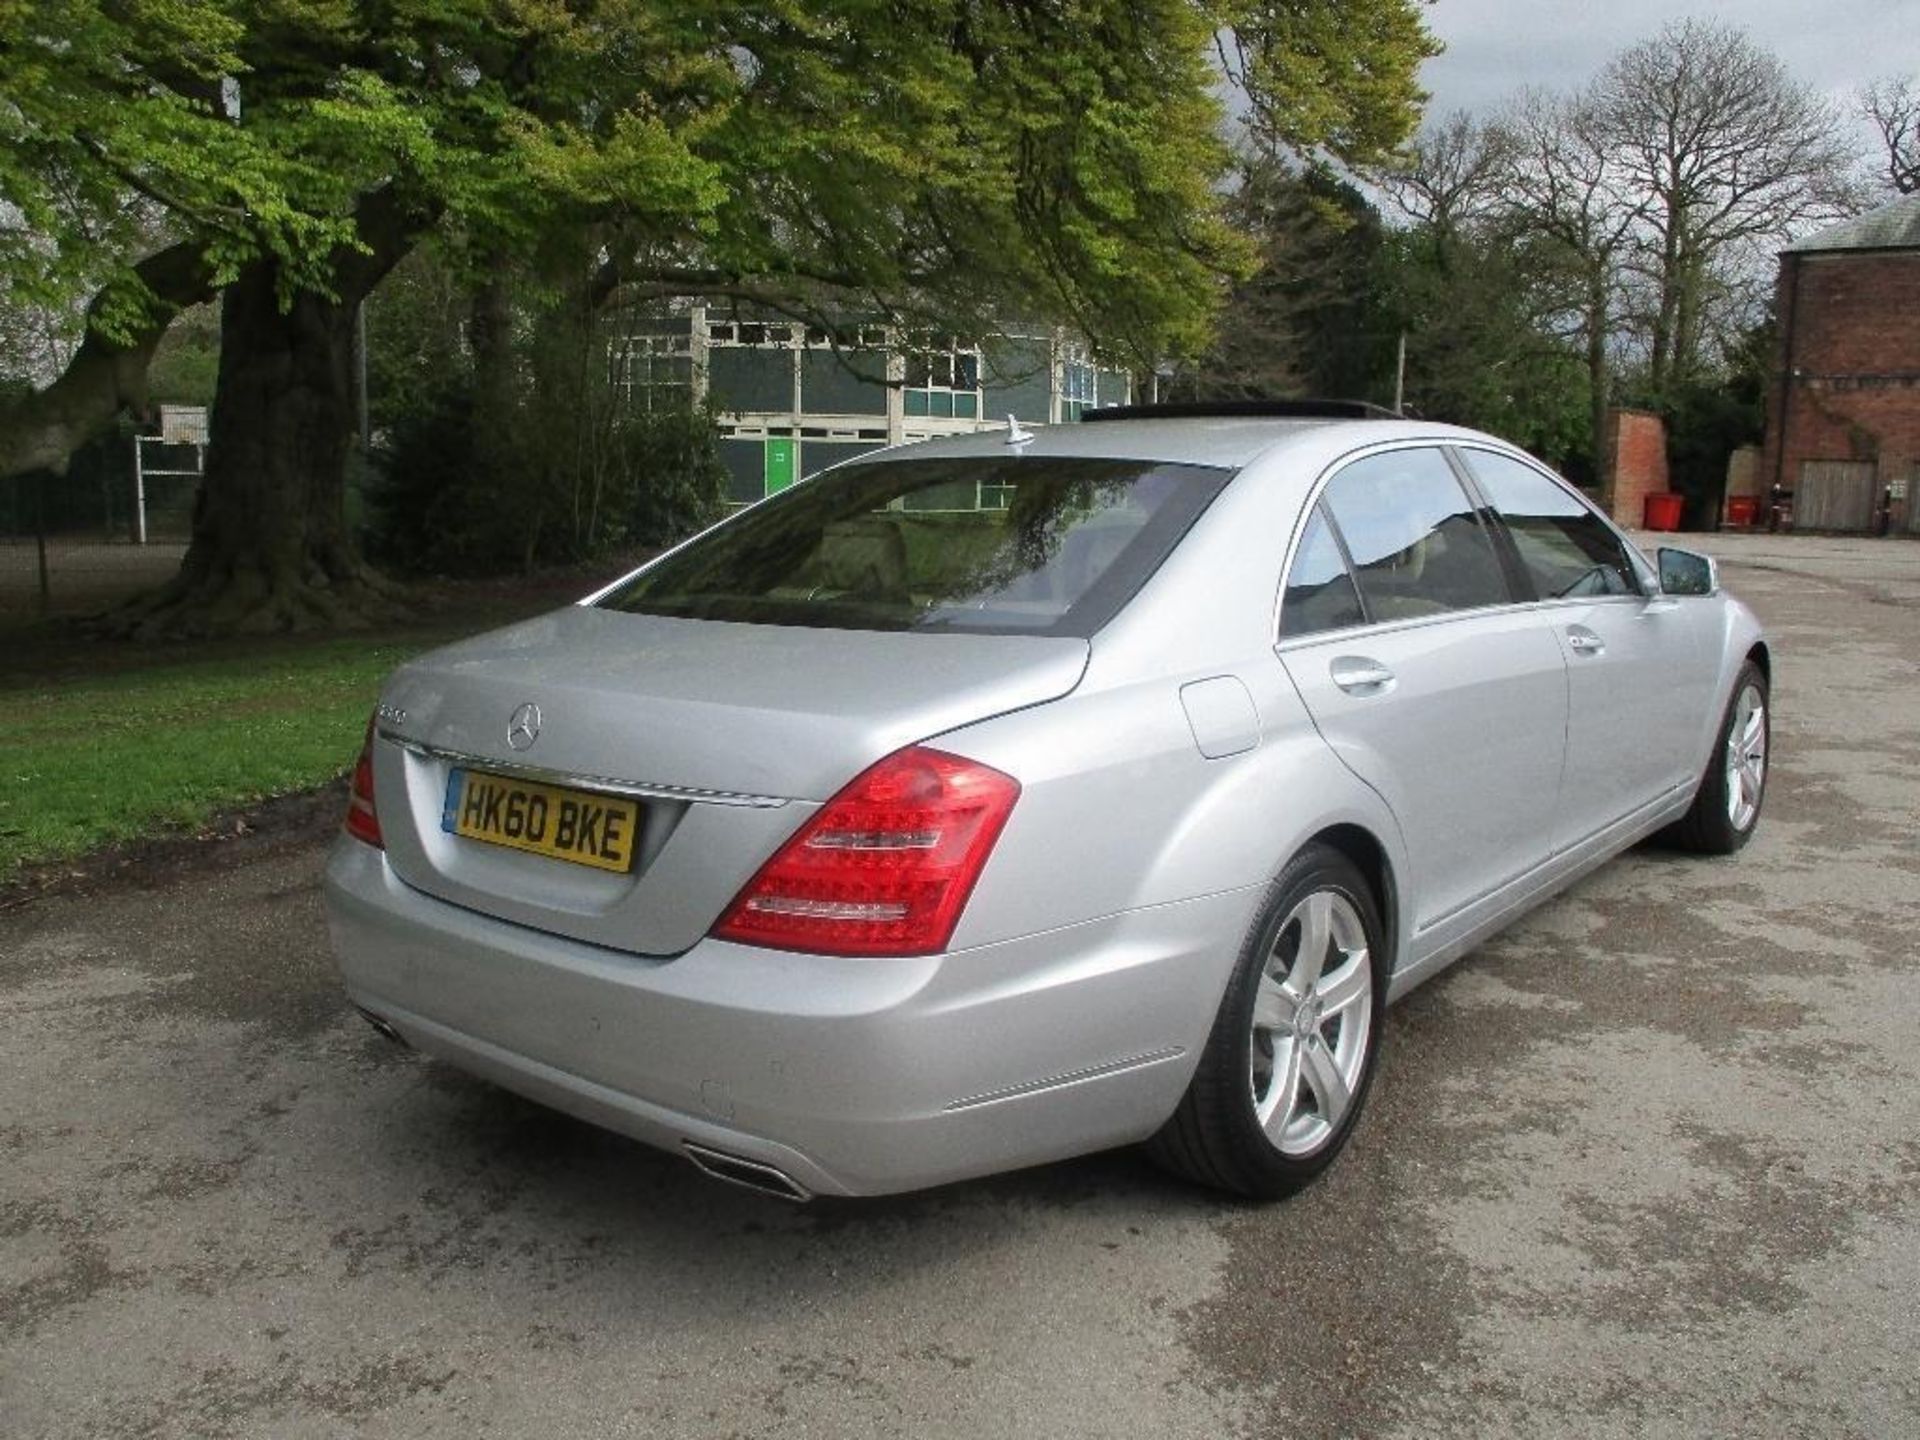 2010/60 REG MERCEDES-BENZ S500 L AUTOMATIC 5.5L PETROL 4 DOOR SALOON, SHOWING 0 FORMER KEEPERS - Image 6 of 9